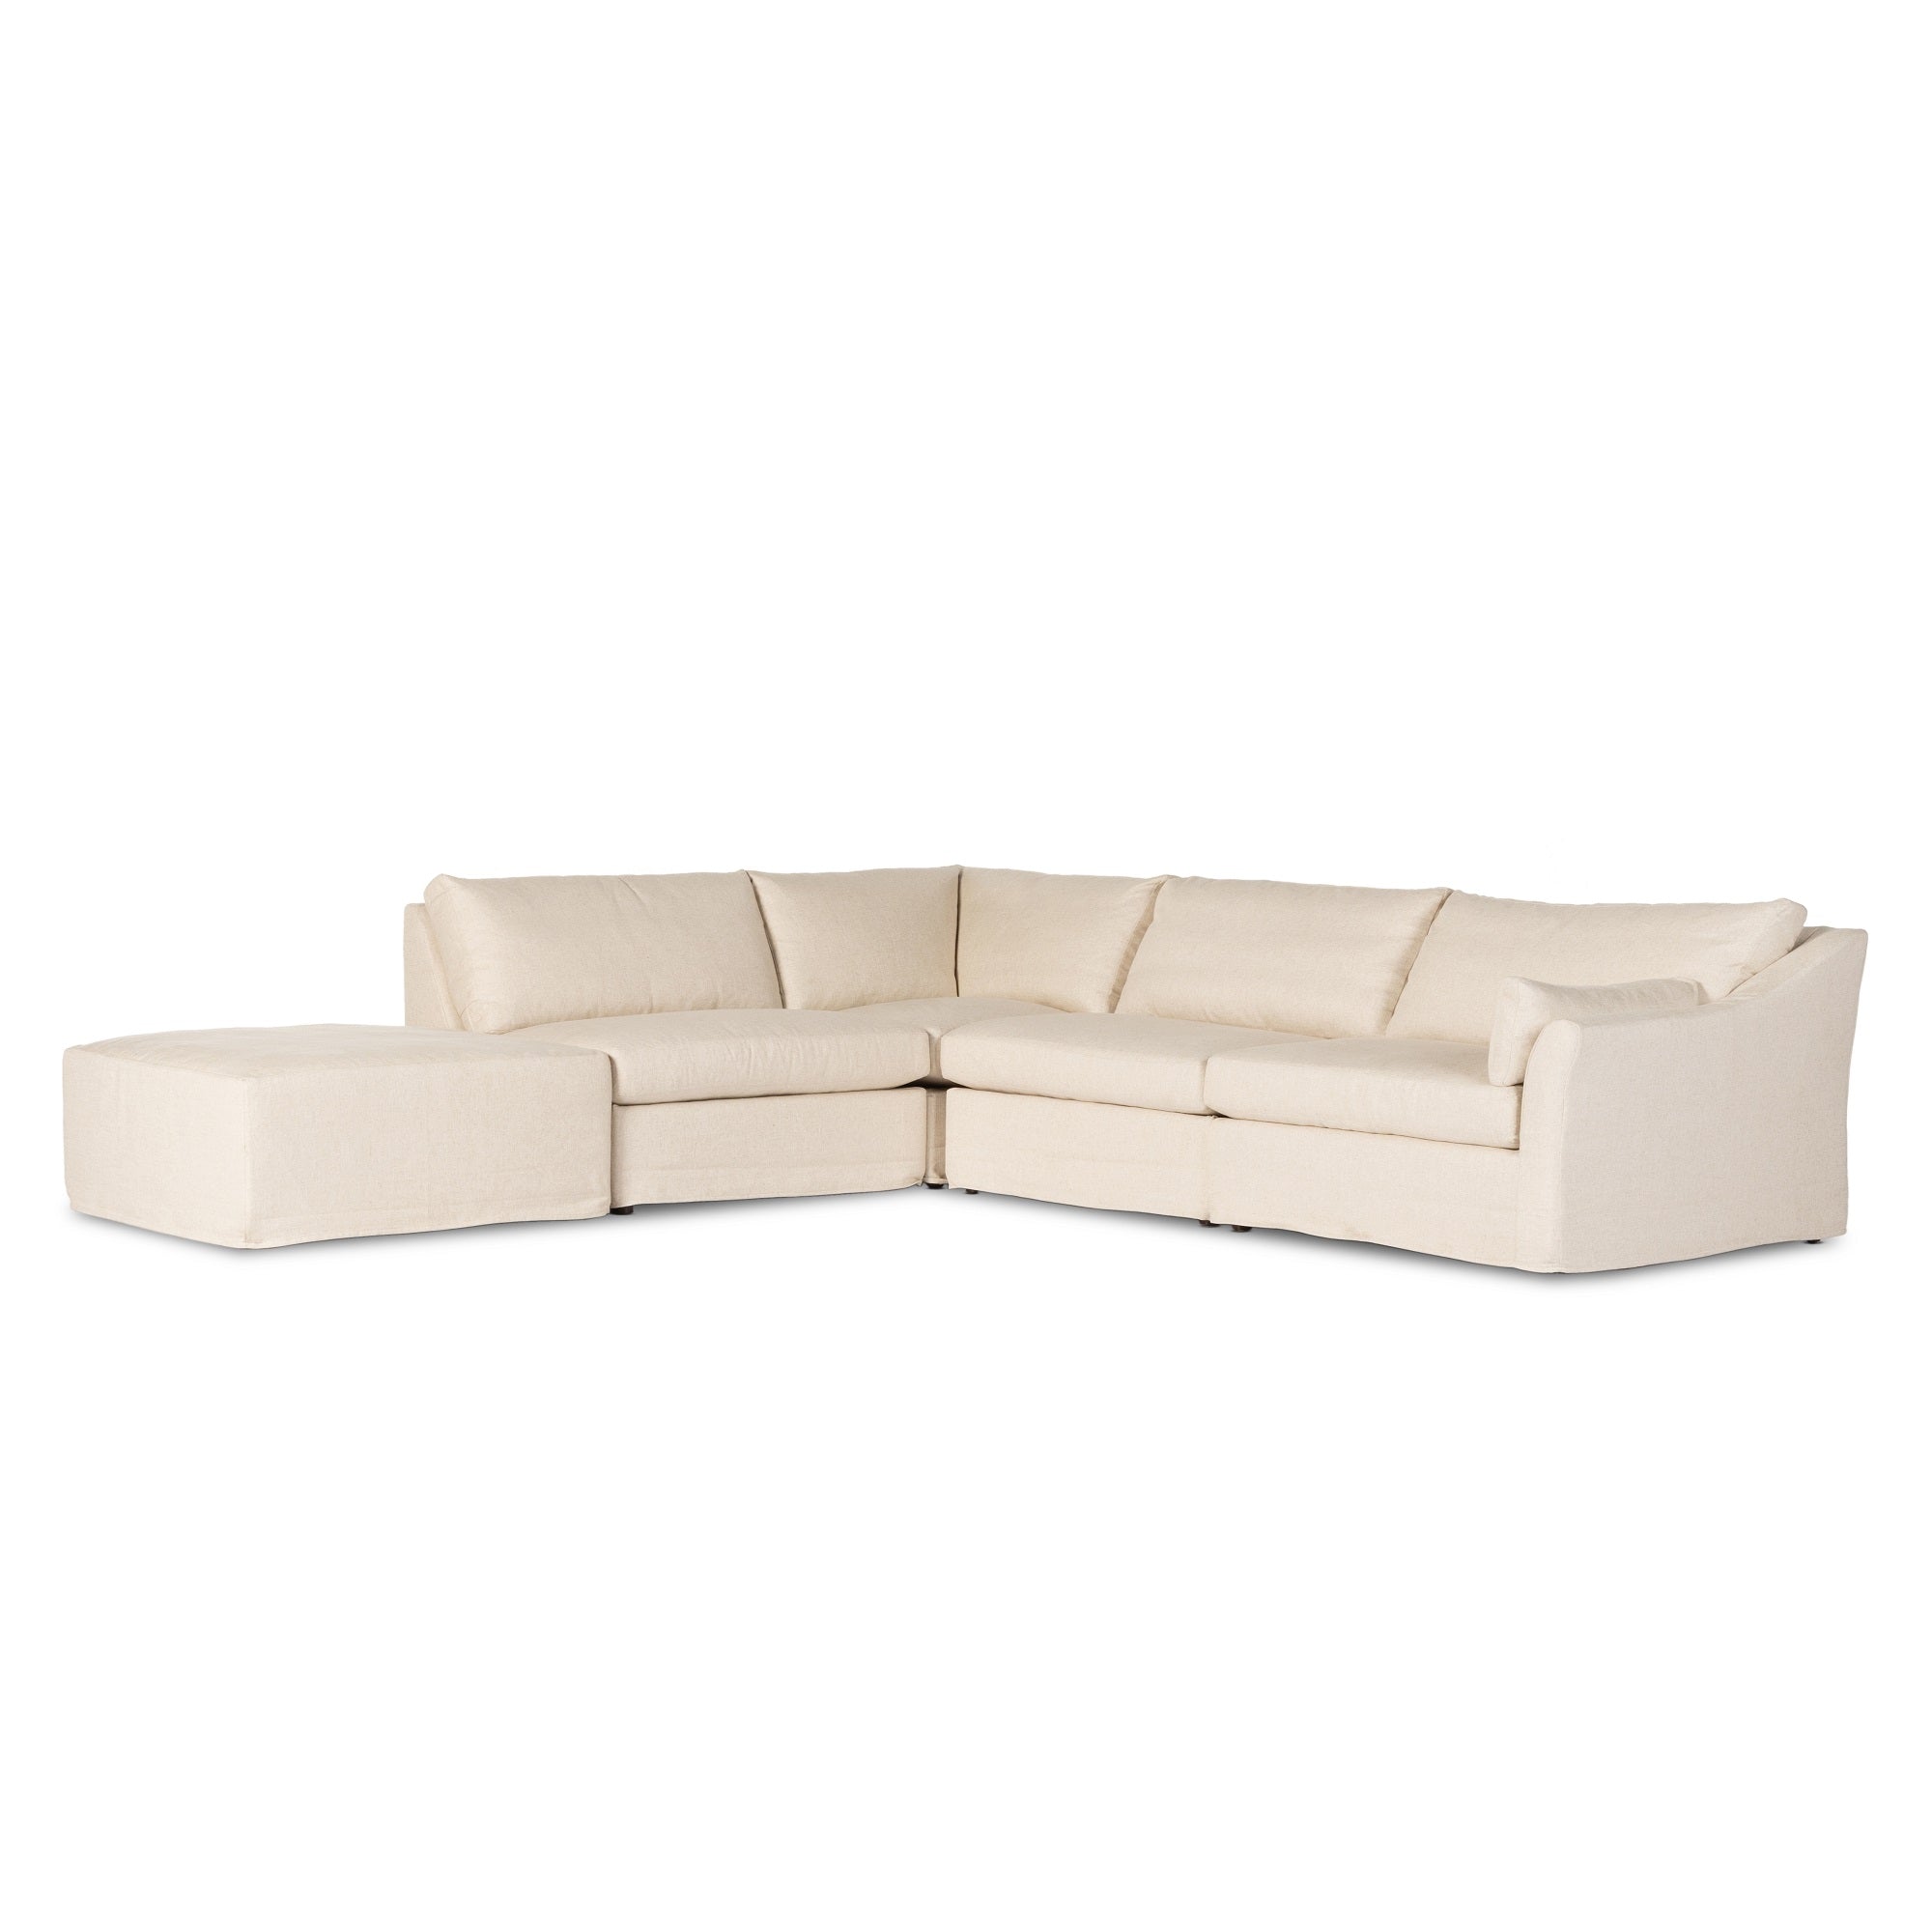 Delray 4-piece Slipcover Sectional